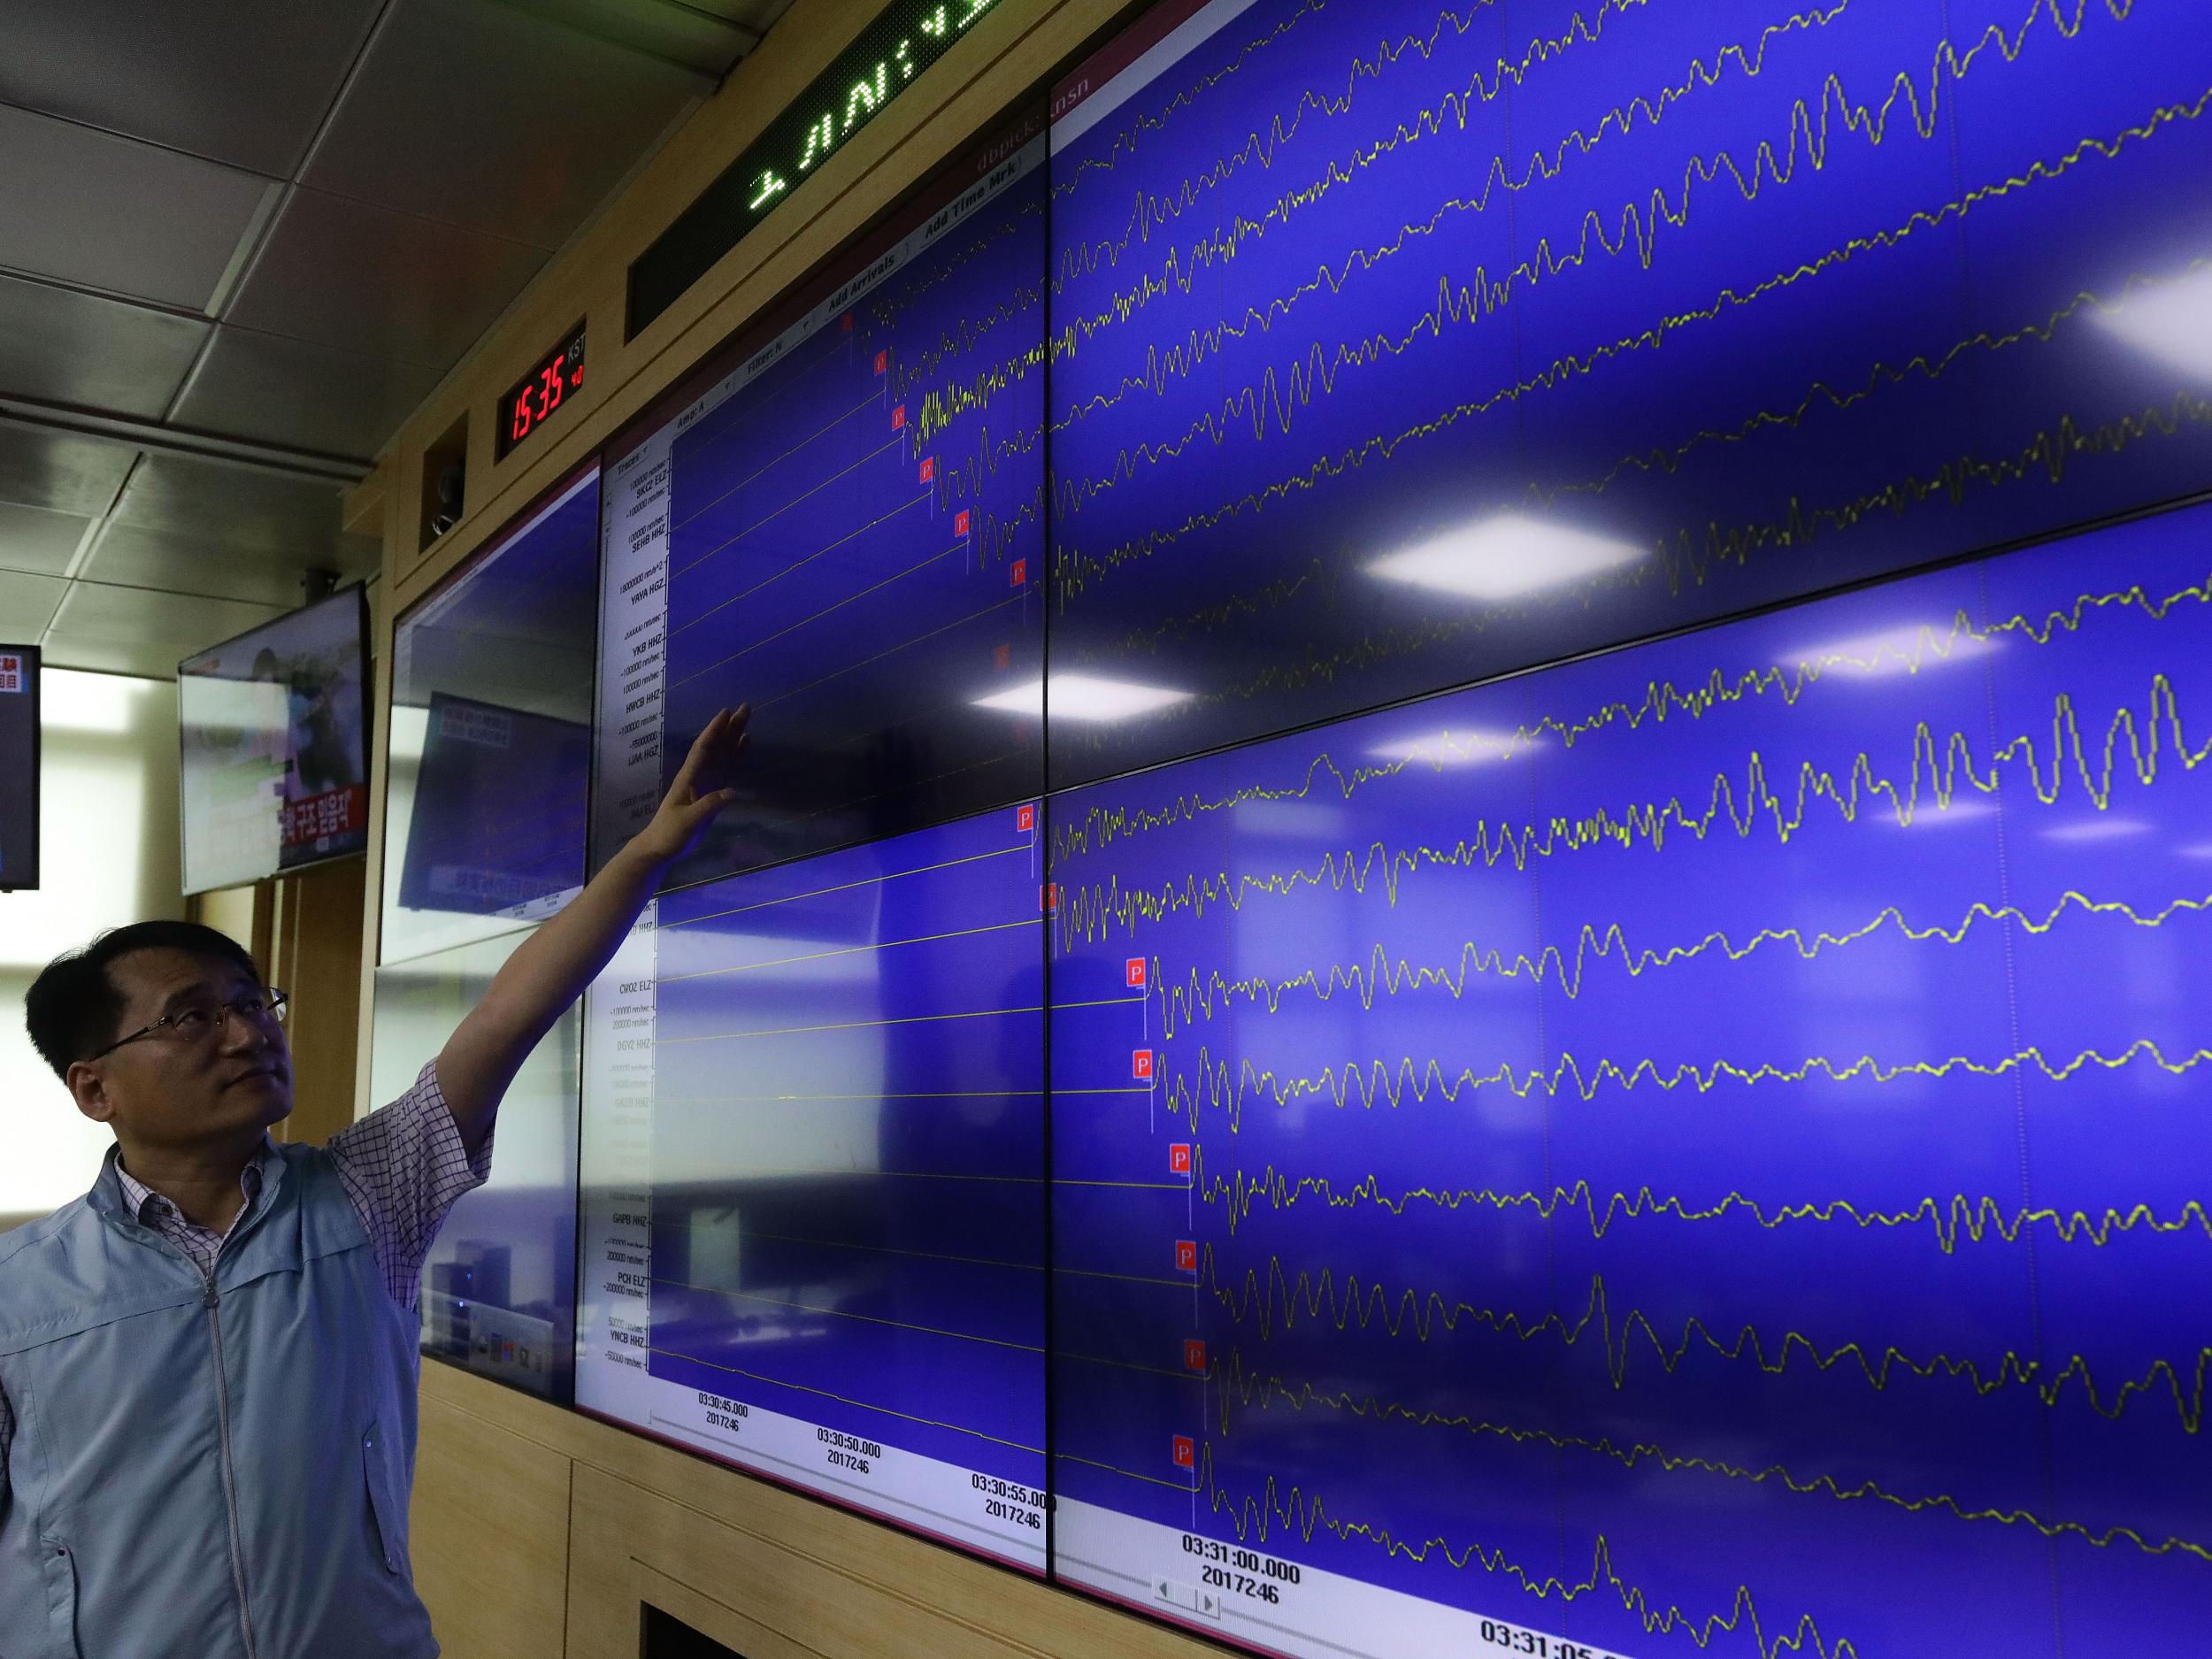 Ryoo Yong-Gyu, a director of the National Earthquake and Volcano Center, shows seismic waves taking place in North Korea on a screen at the Korea Meteorological Administration center on 3 September, 2017 in Seoul, South Korea.